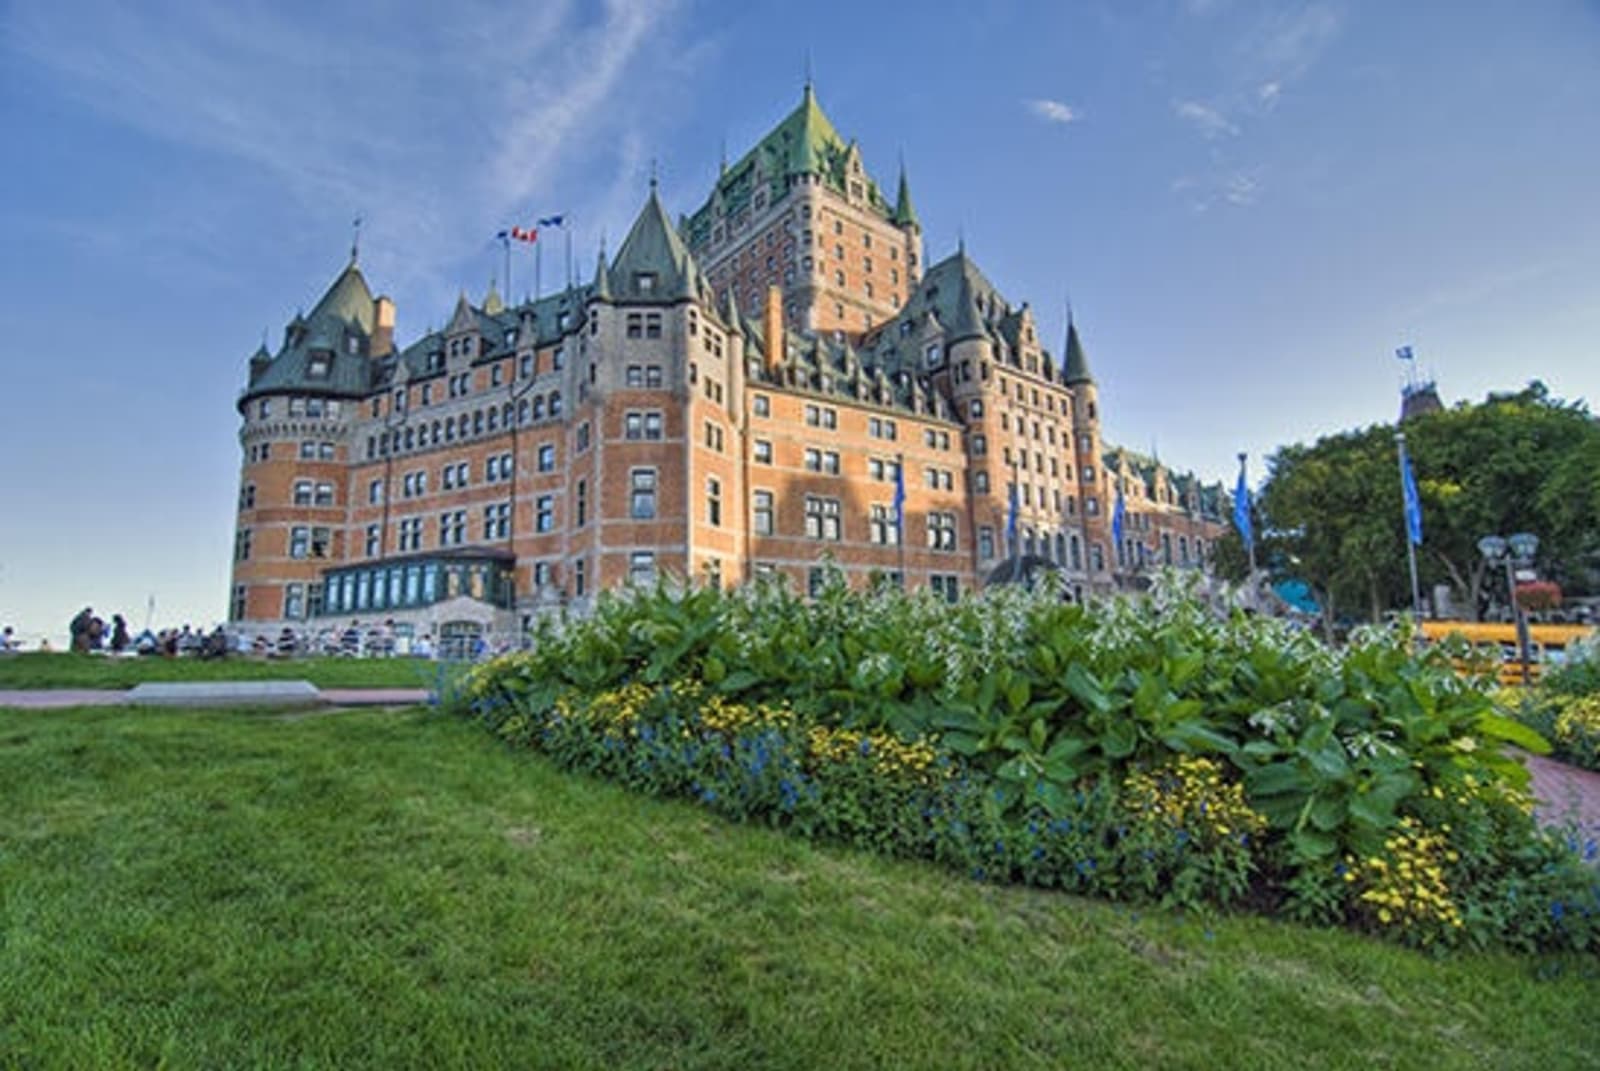 View of Chateau Frontenac in Quebec.